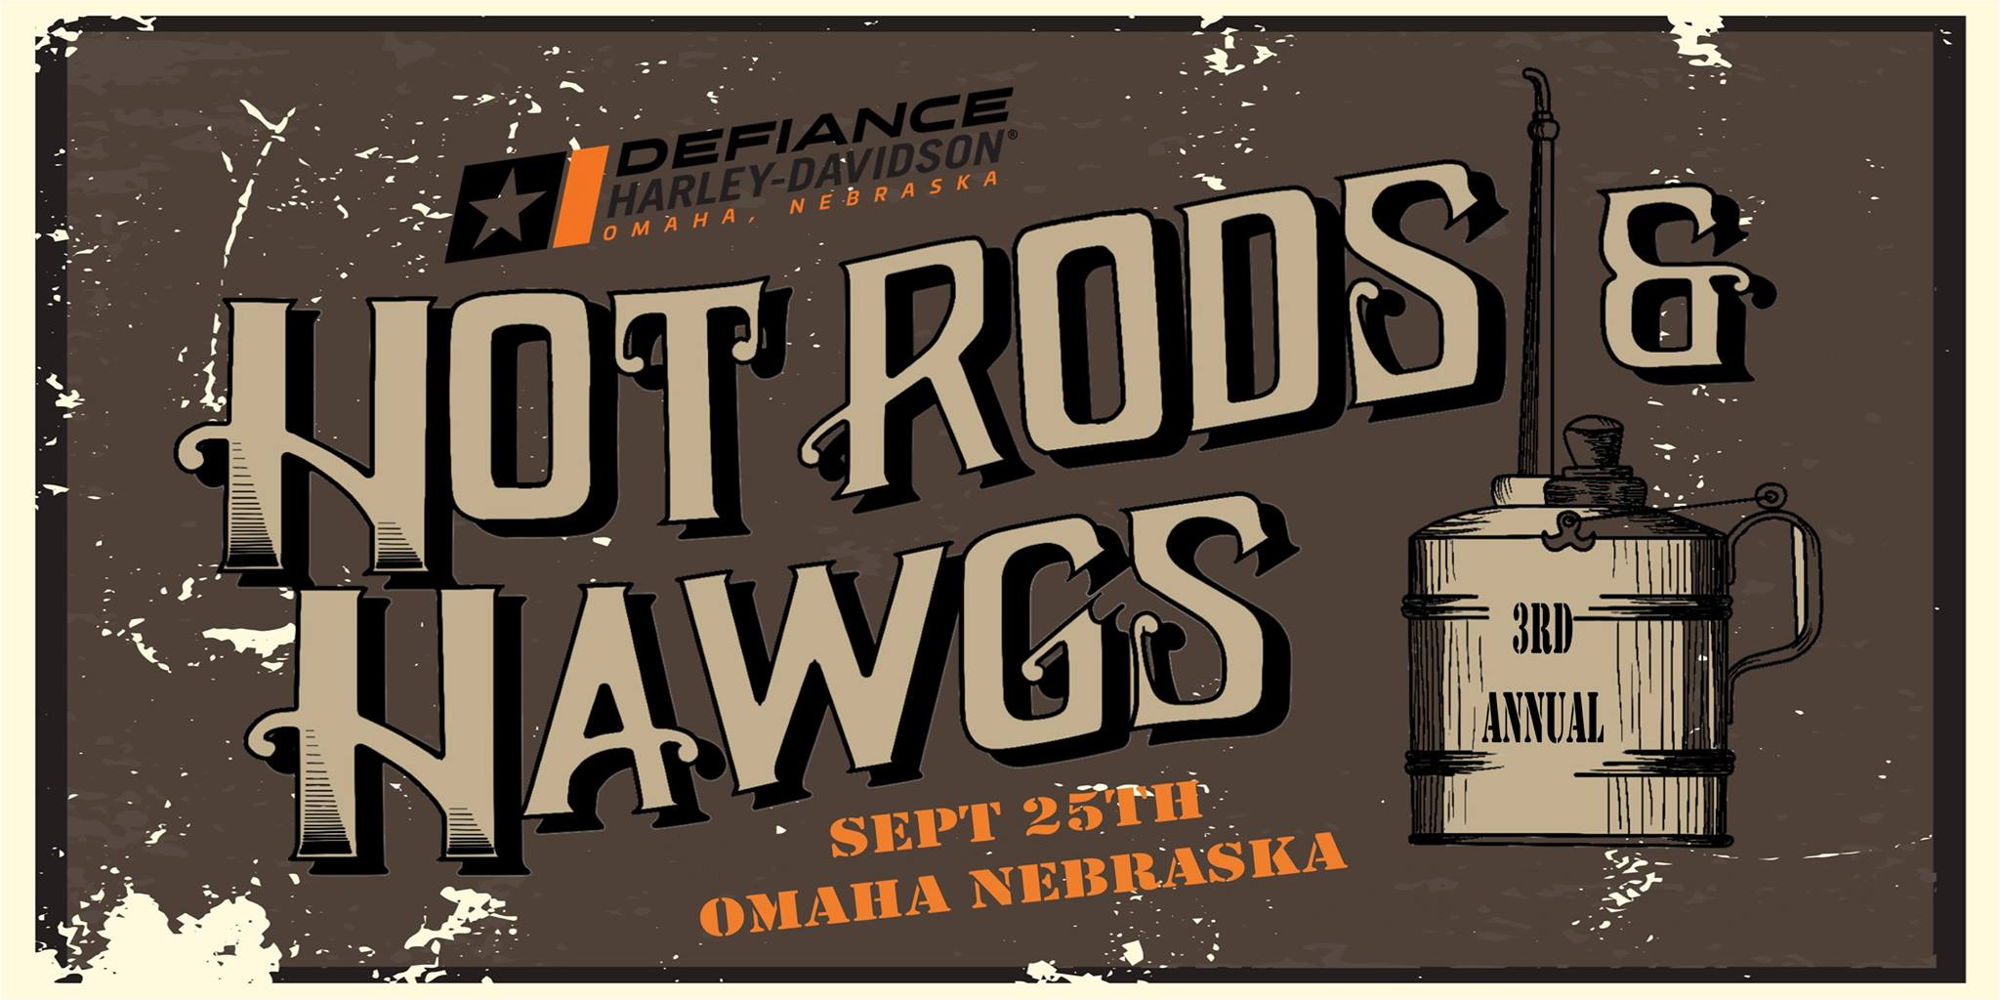 Hot Rods & Hawgs Car & Bike Show promotional image